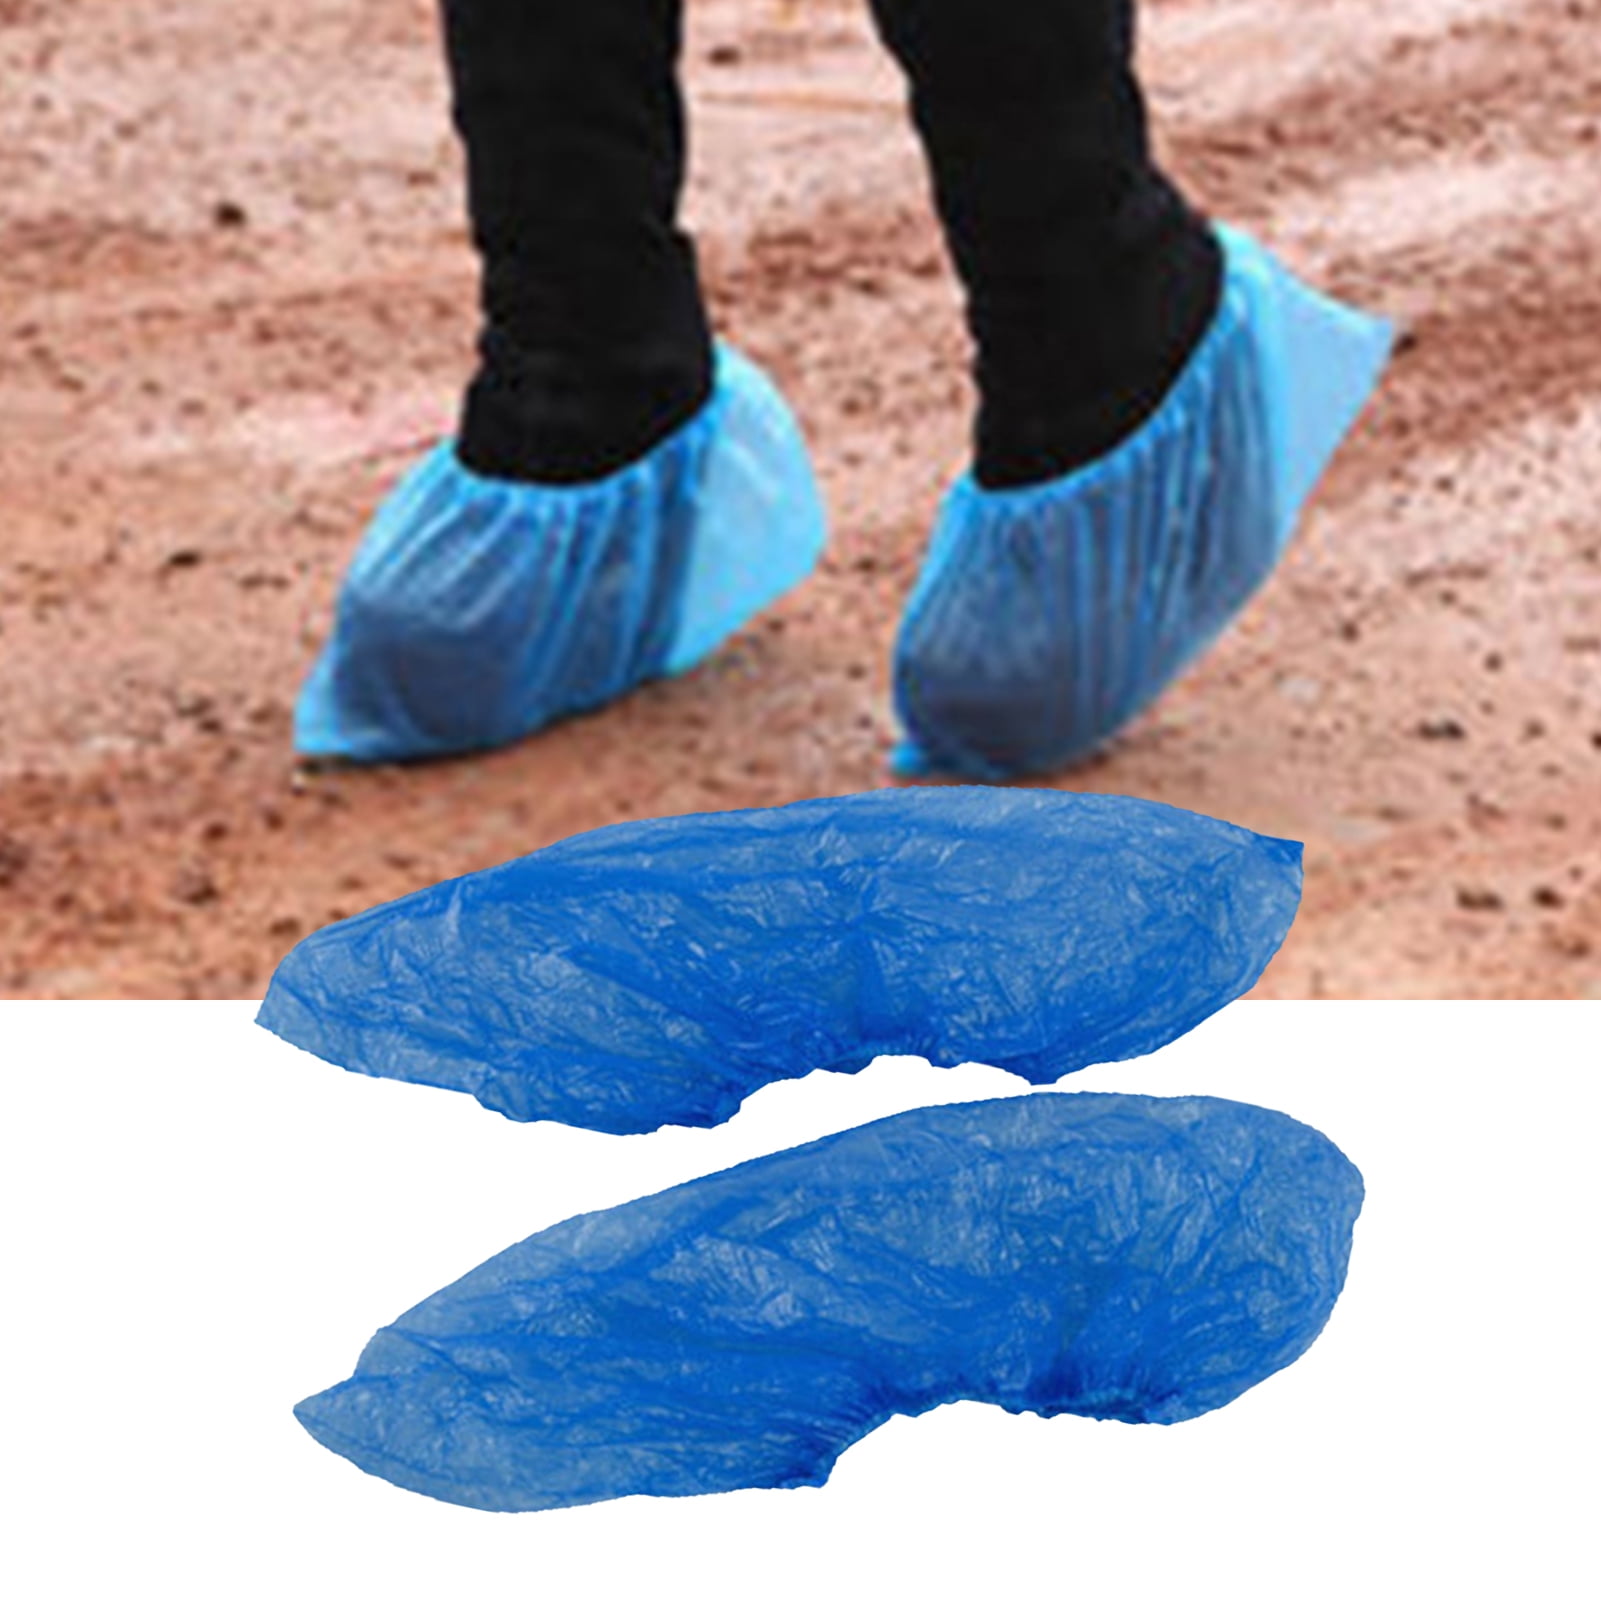 100pcs 50 Pairs Booties Shoe Covers Non Slip Disposable Overshoes Blue HOT NEW 